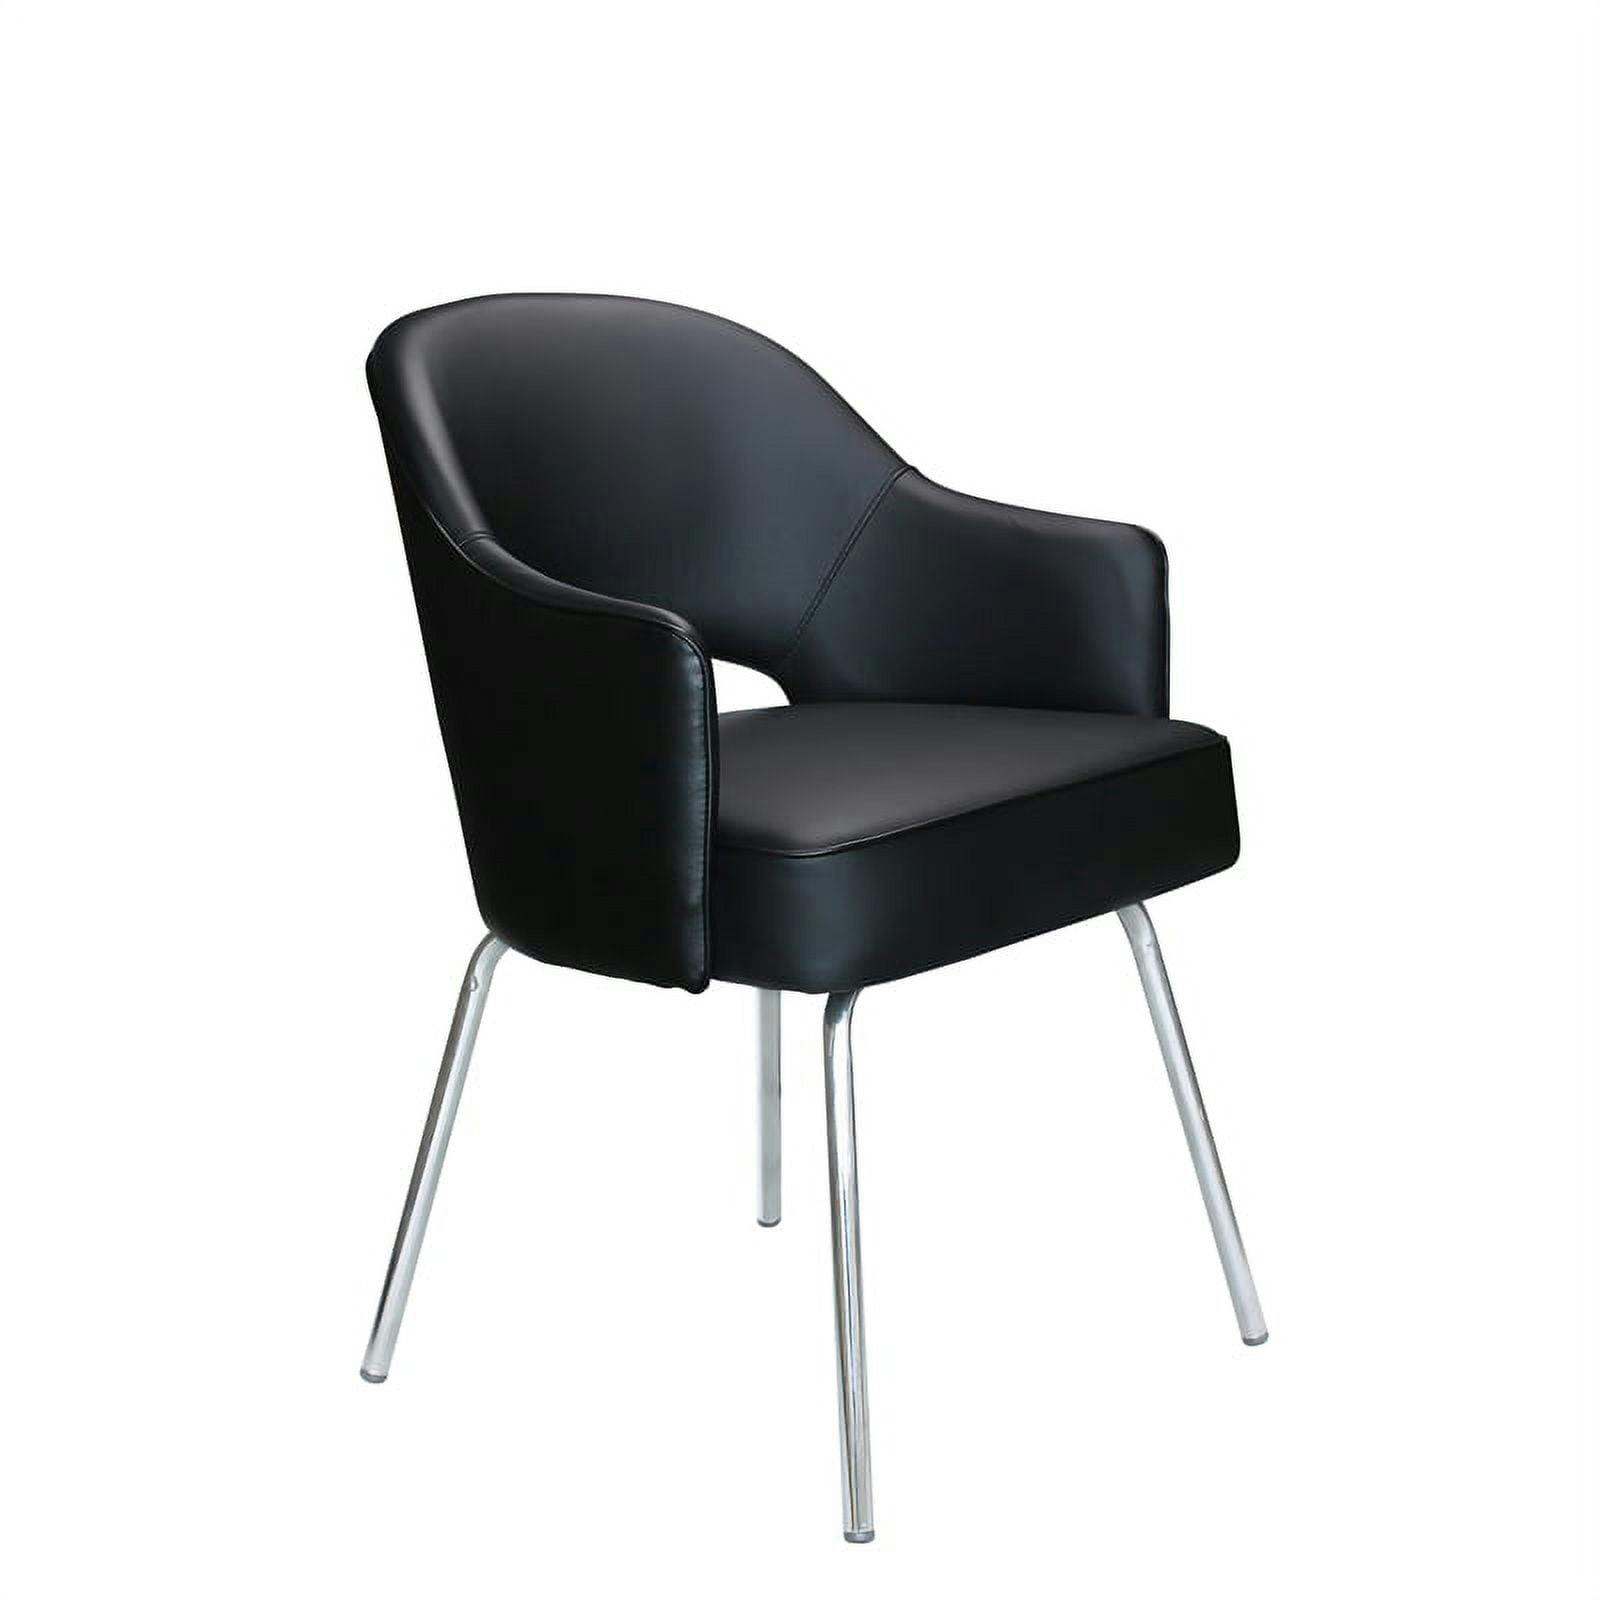 Elegant Black Vinyl and Chrome Fixed Arm Guest Chair